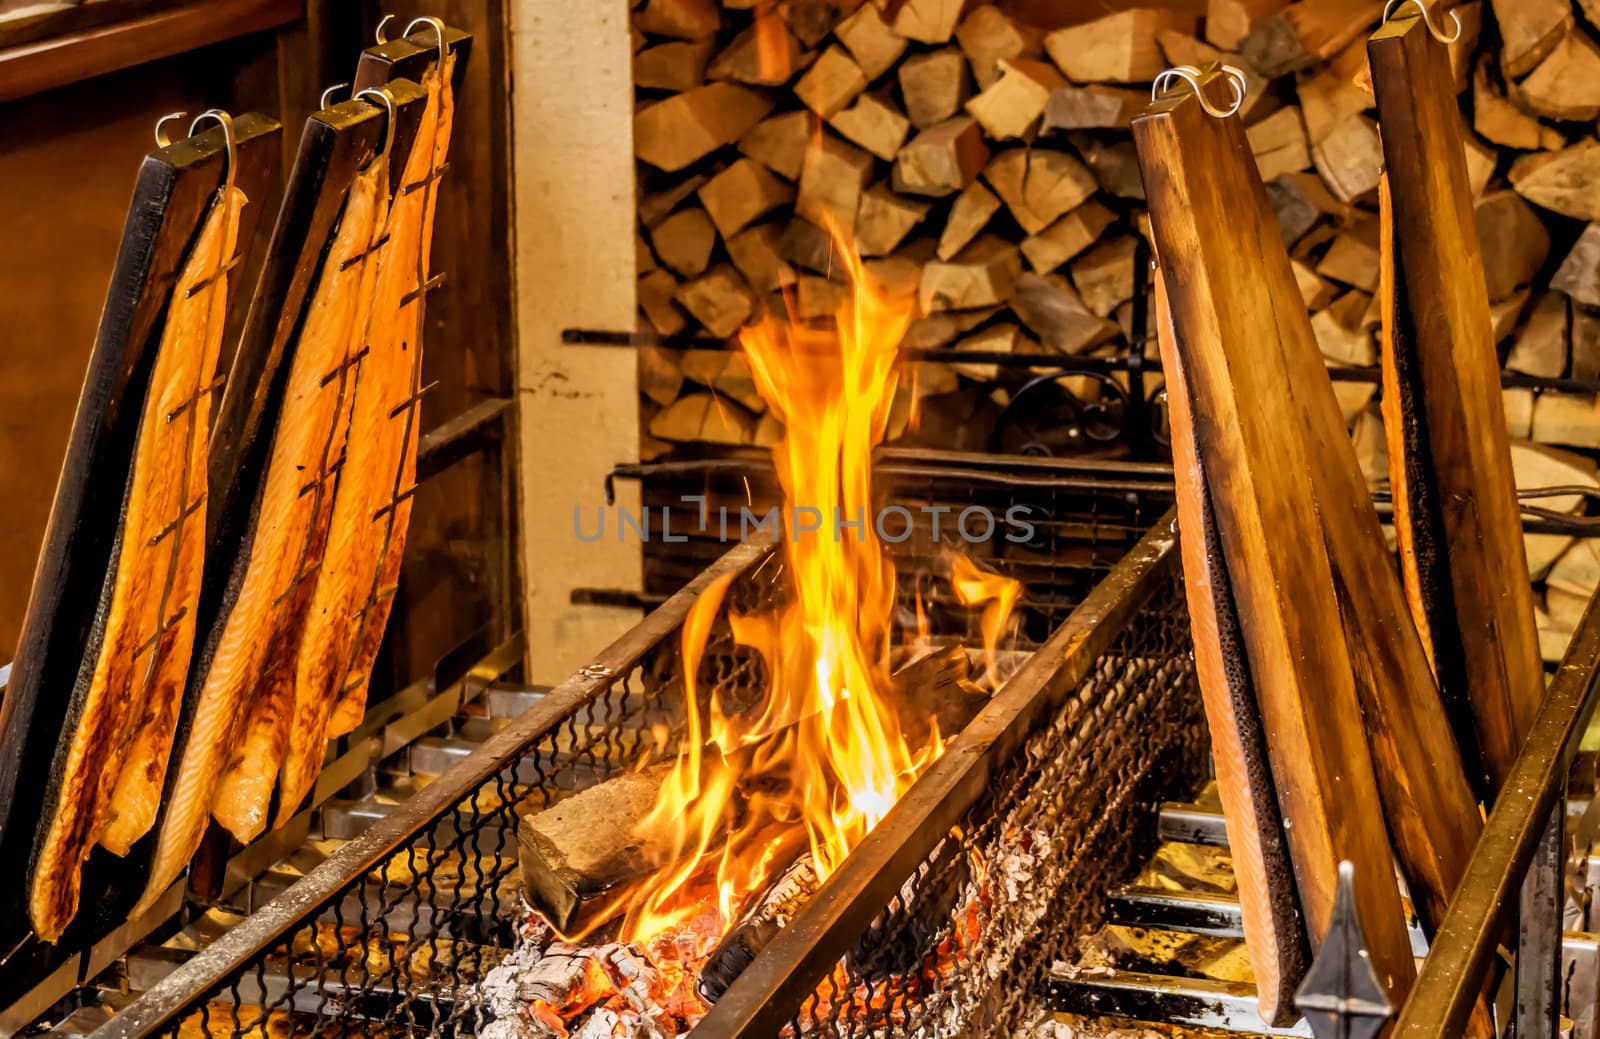 Flame salmon at a Christmas market in Germany by geogif